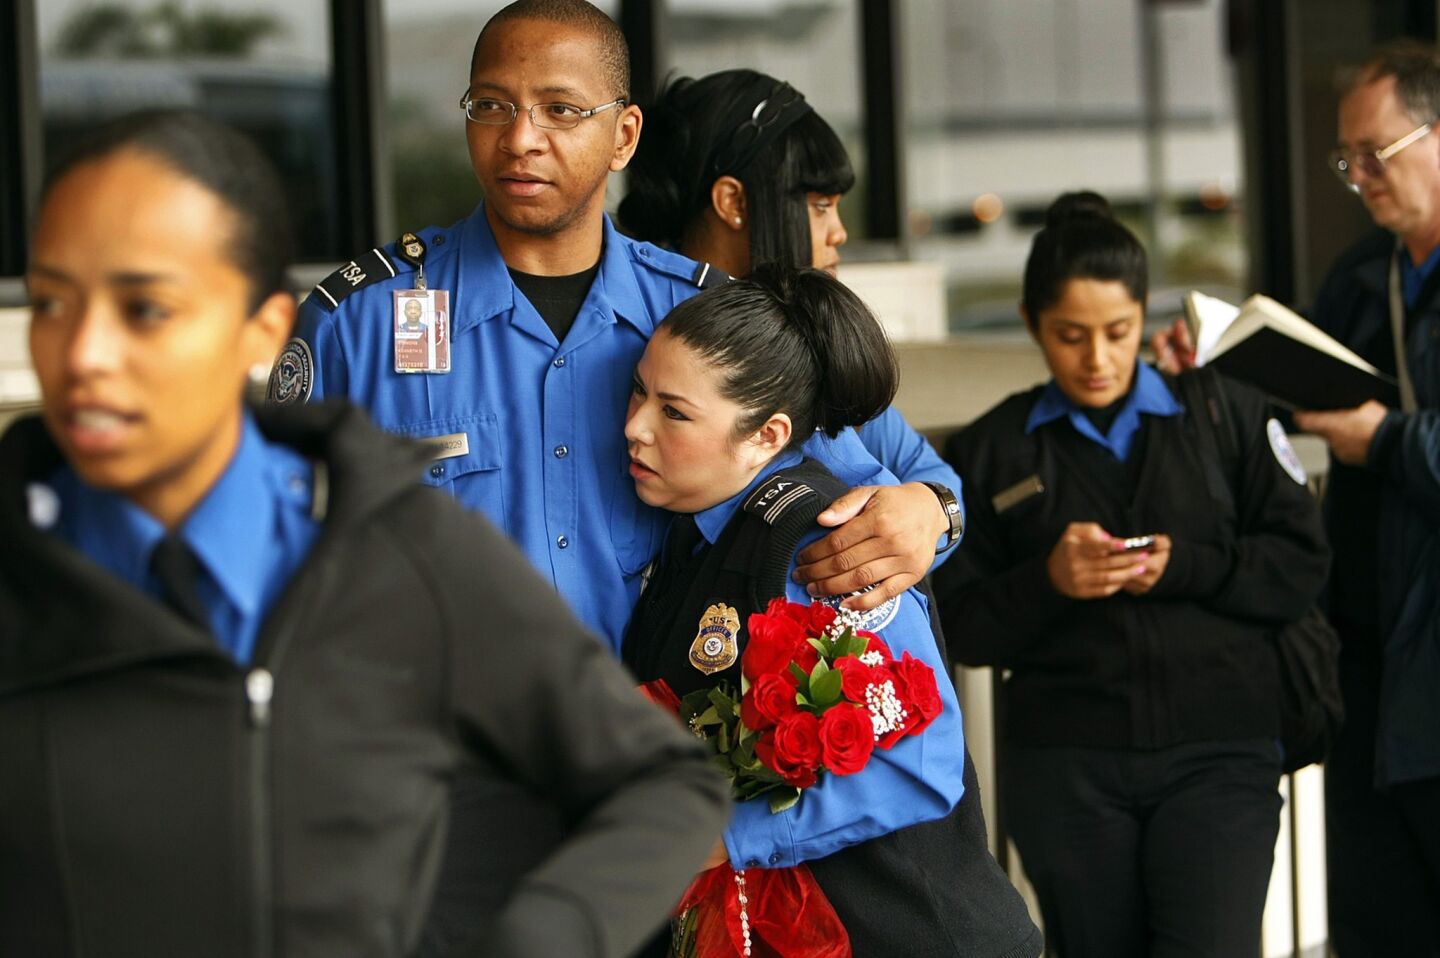 Transportation Security Administration agents embrace in front of Terminal 3 at LAX on Monday. Three days after a fellow agent was killed and several others wounded.